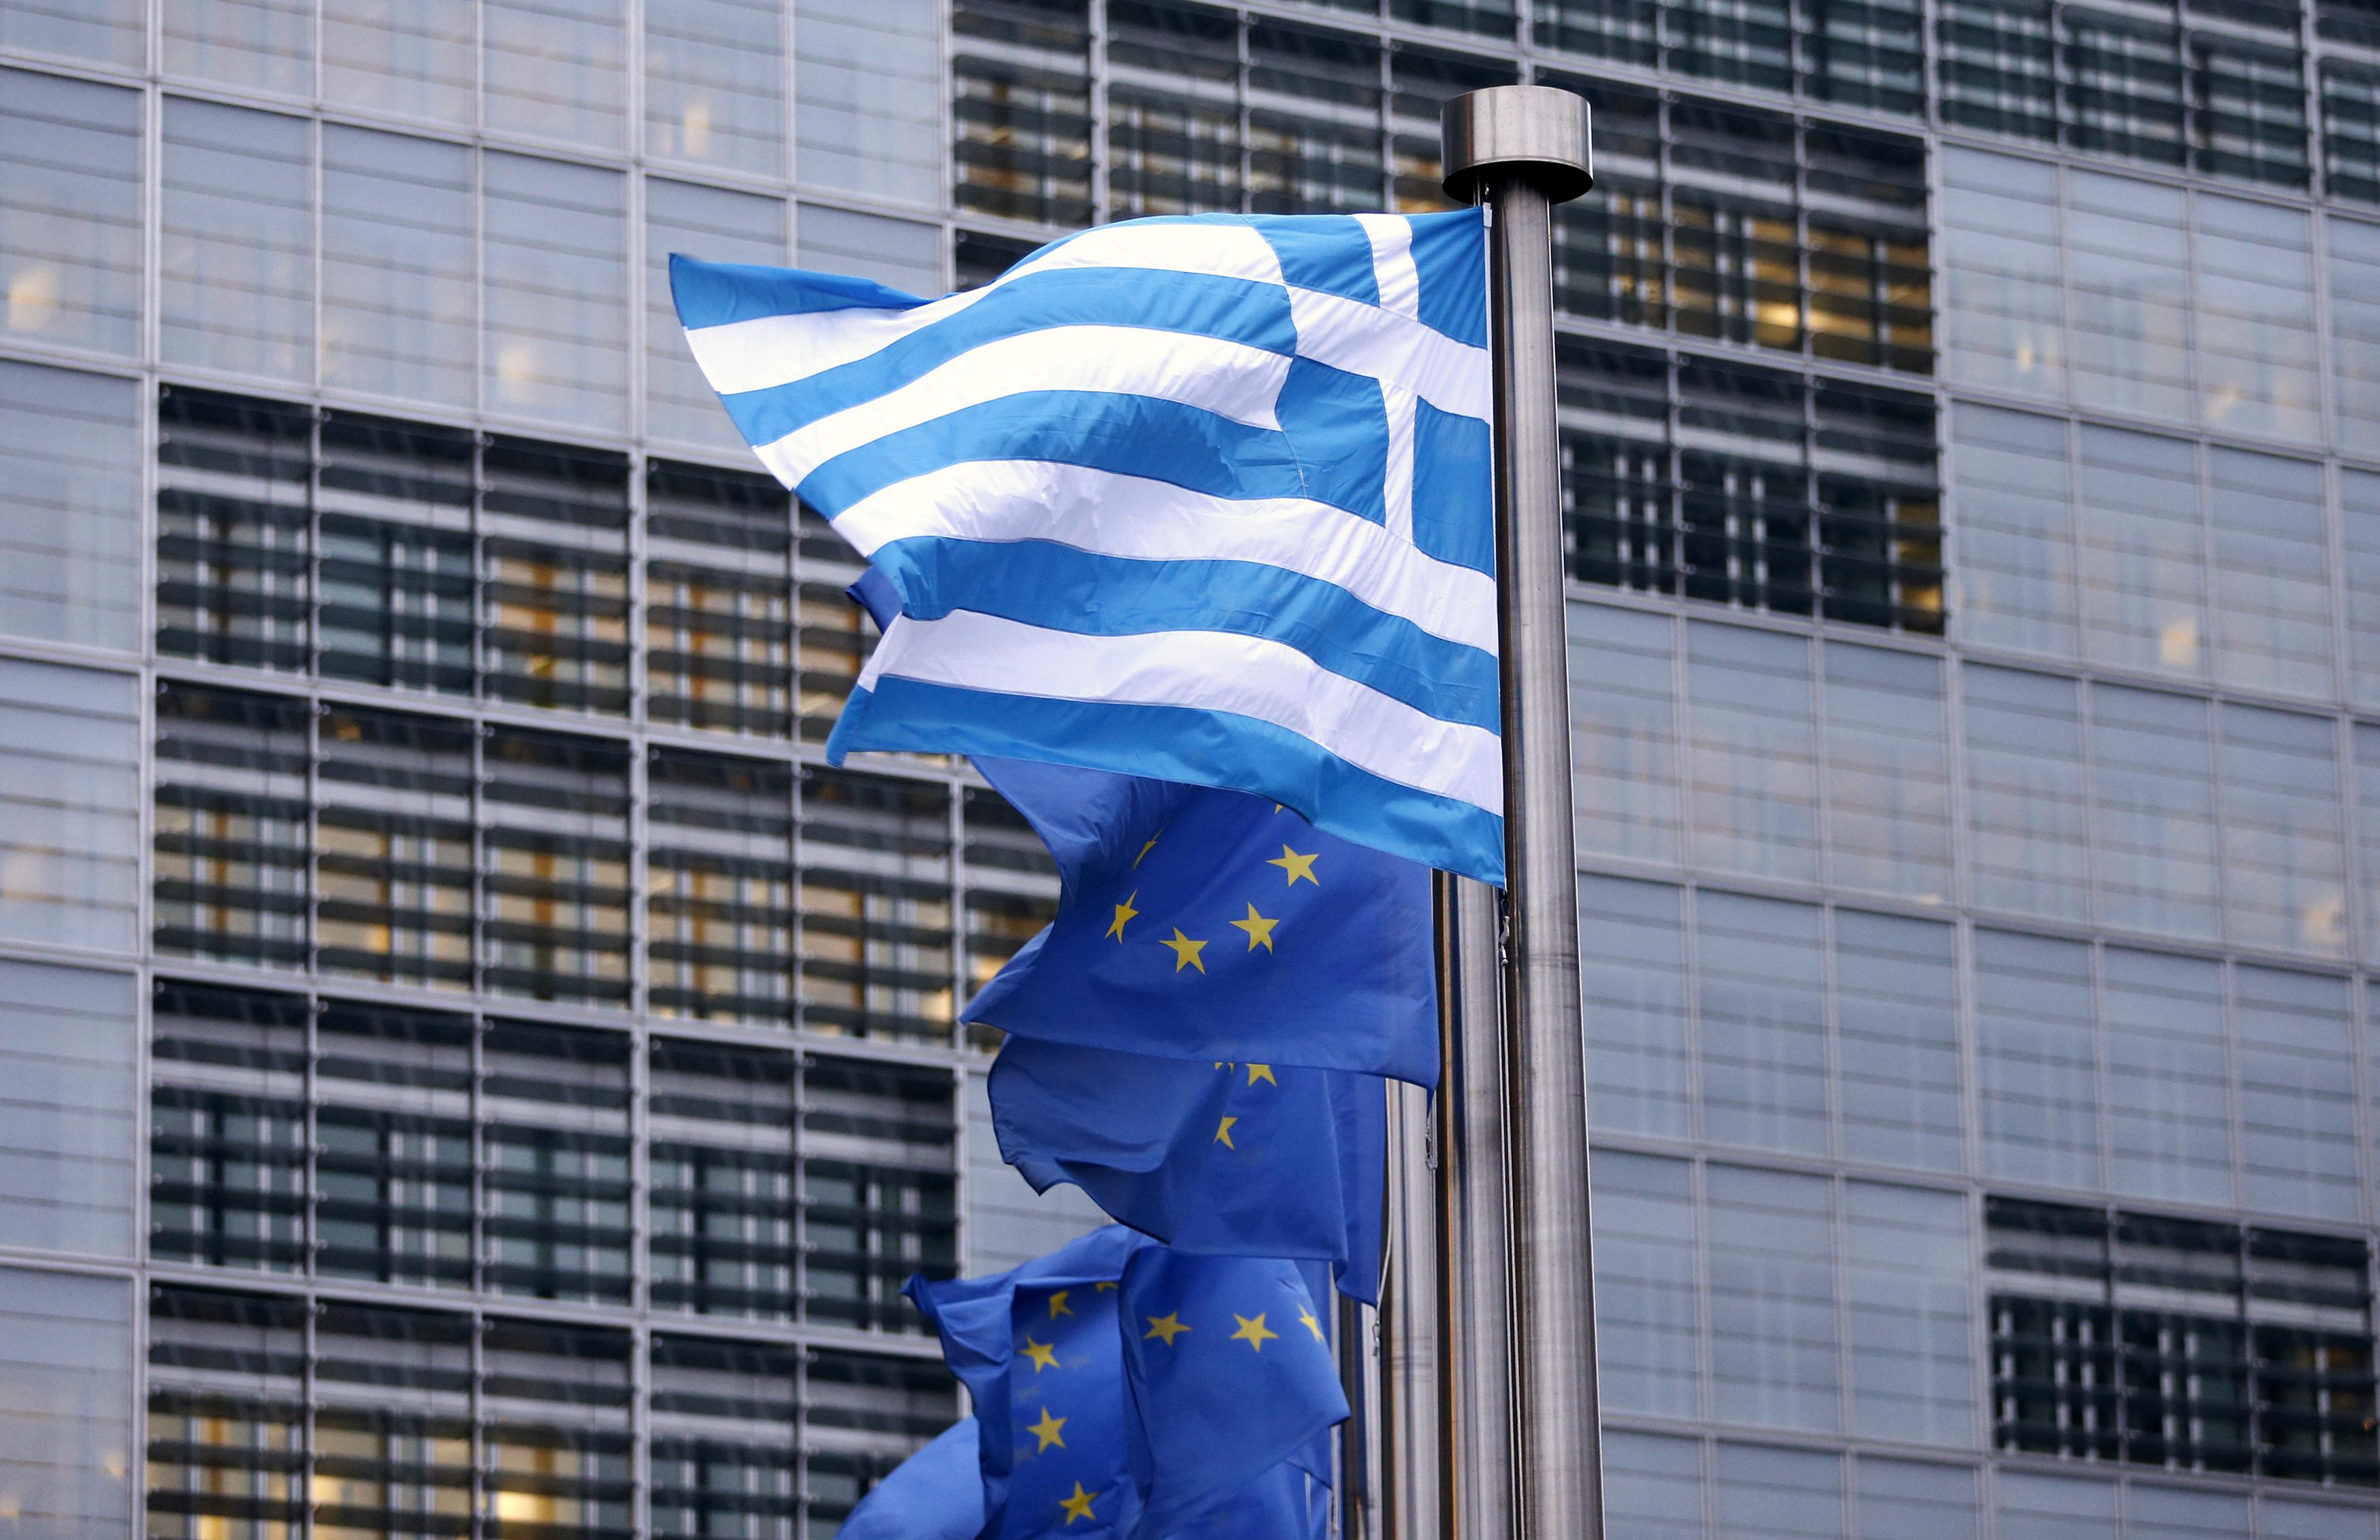 Bloomberg: Creditors to present agreement proposal to Greece